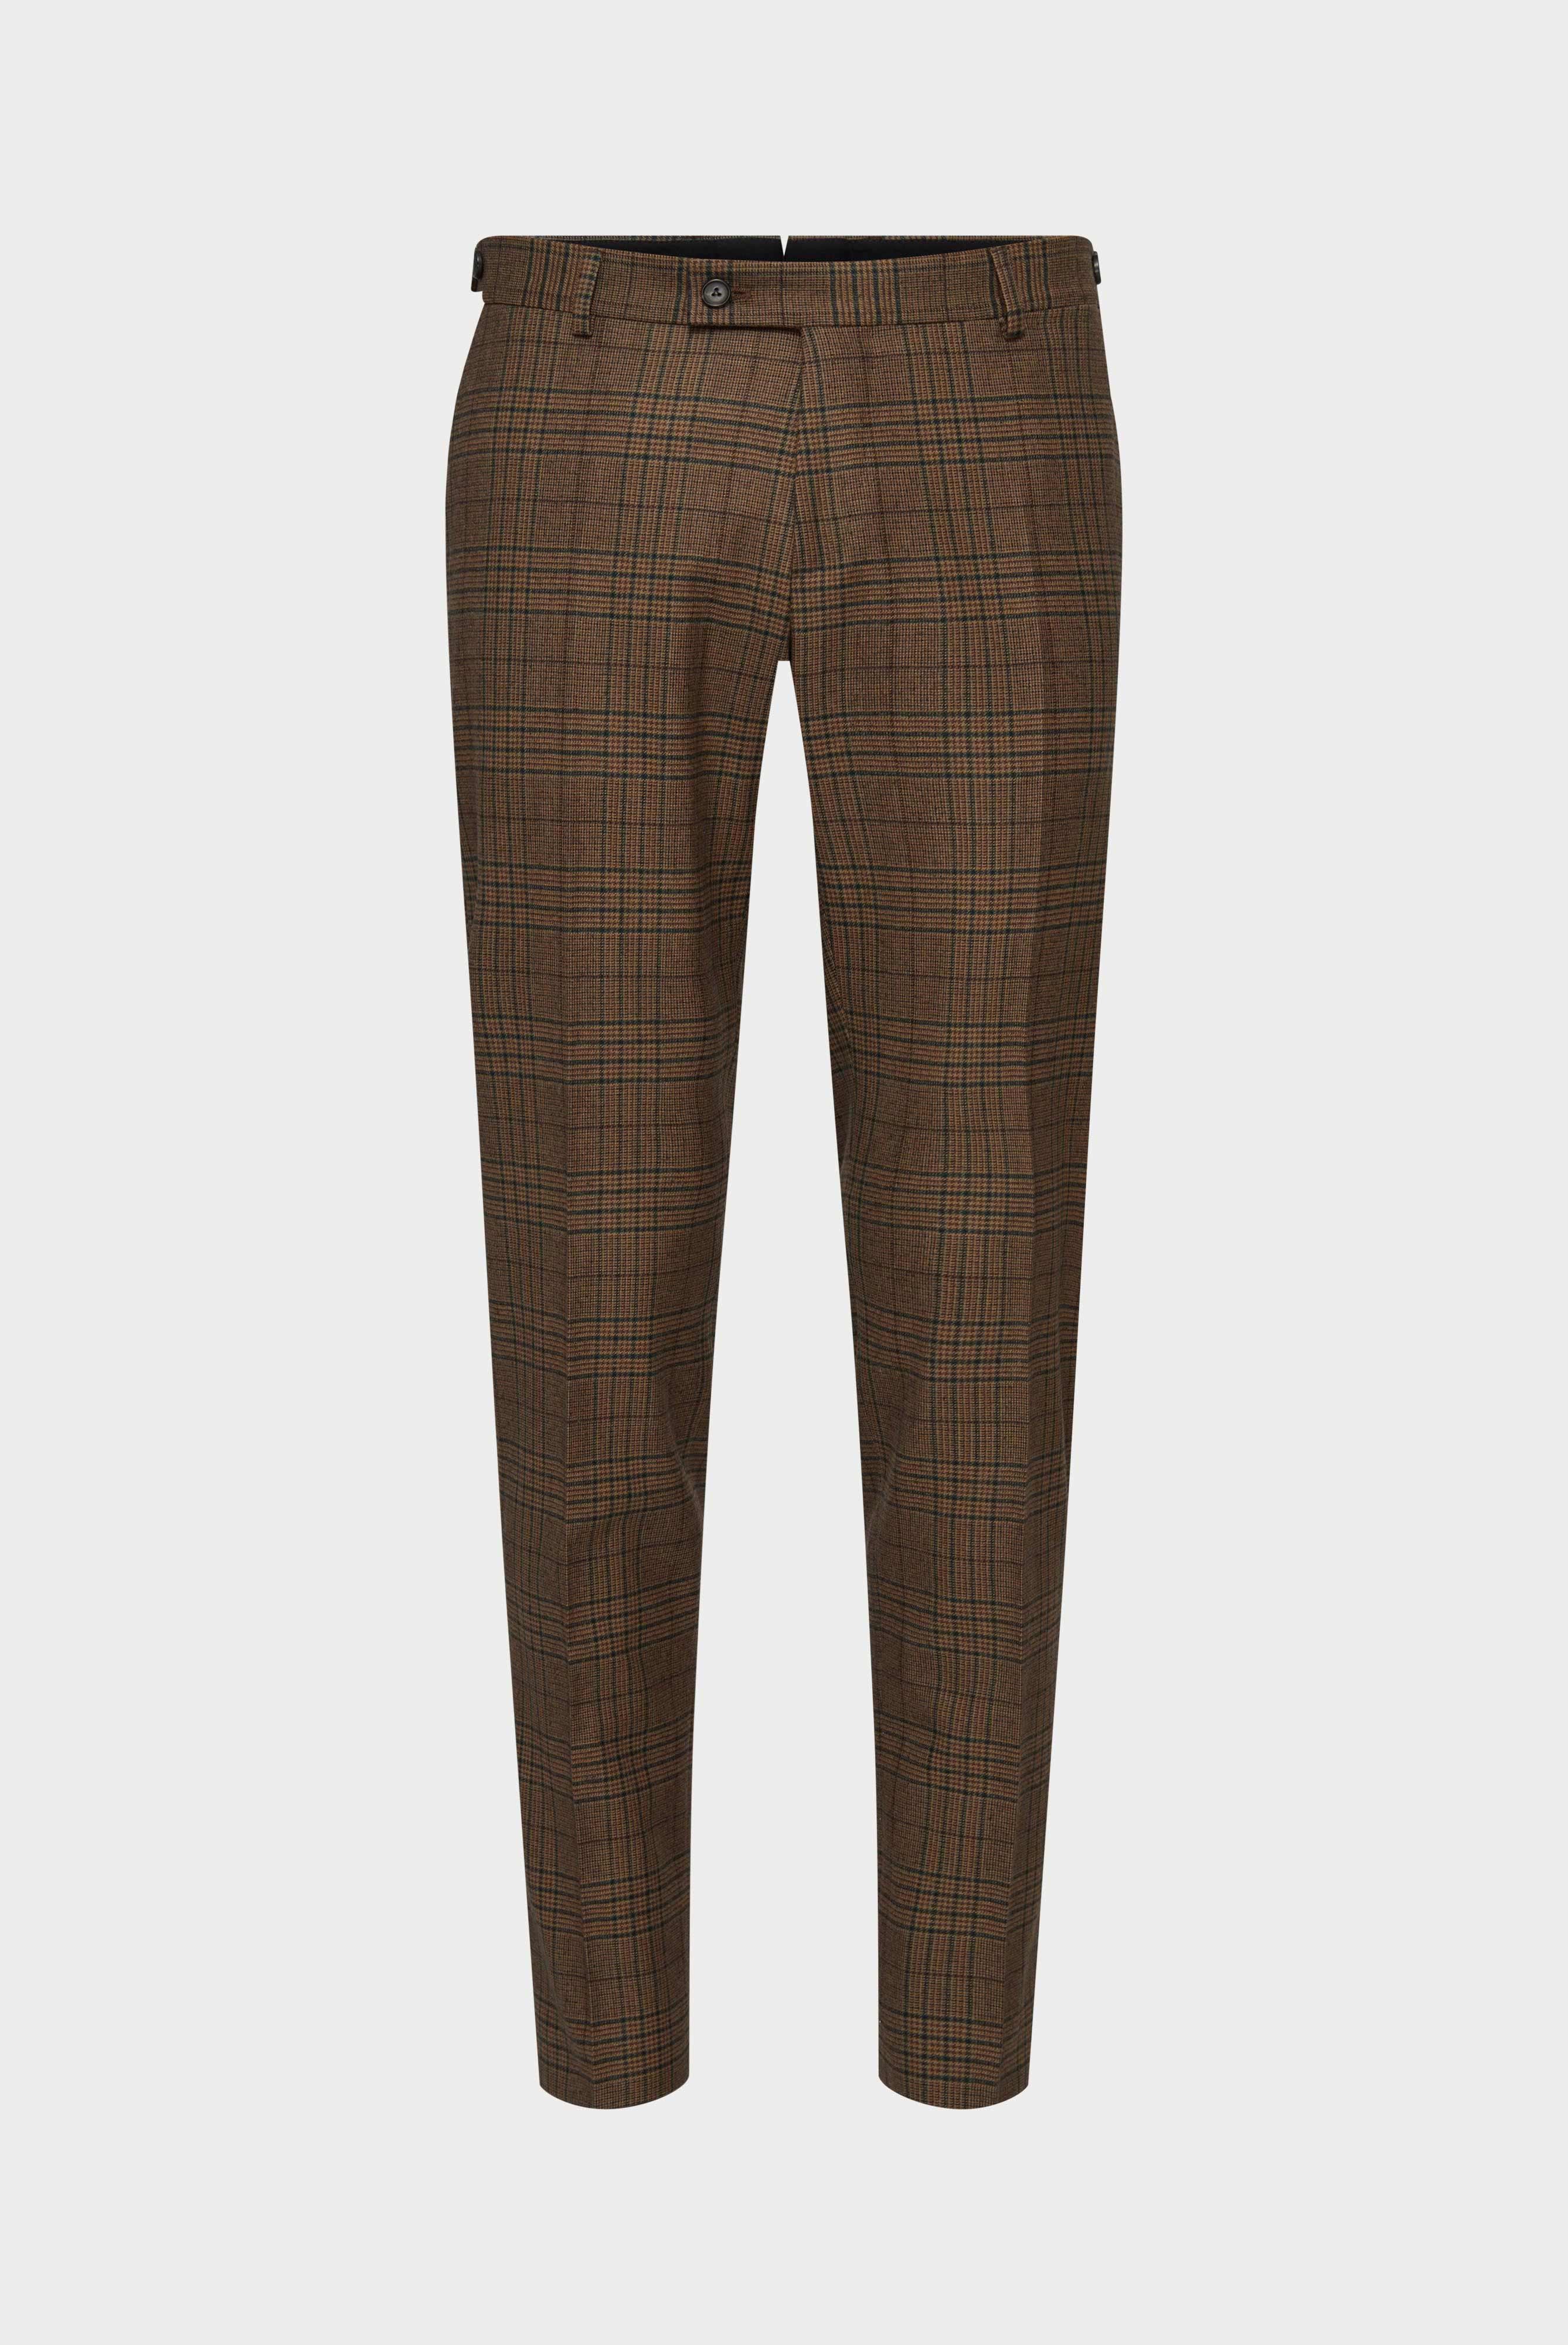 Jeans & Trousers+Checkt trousers slim fit+20.7854.16.H01202.170.48